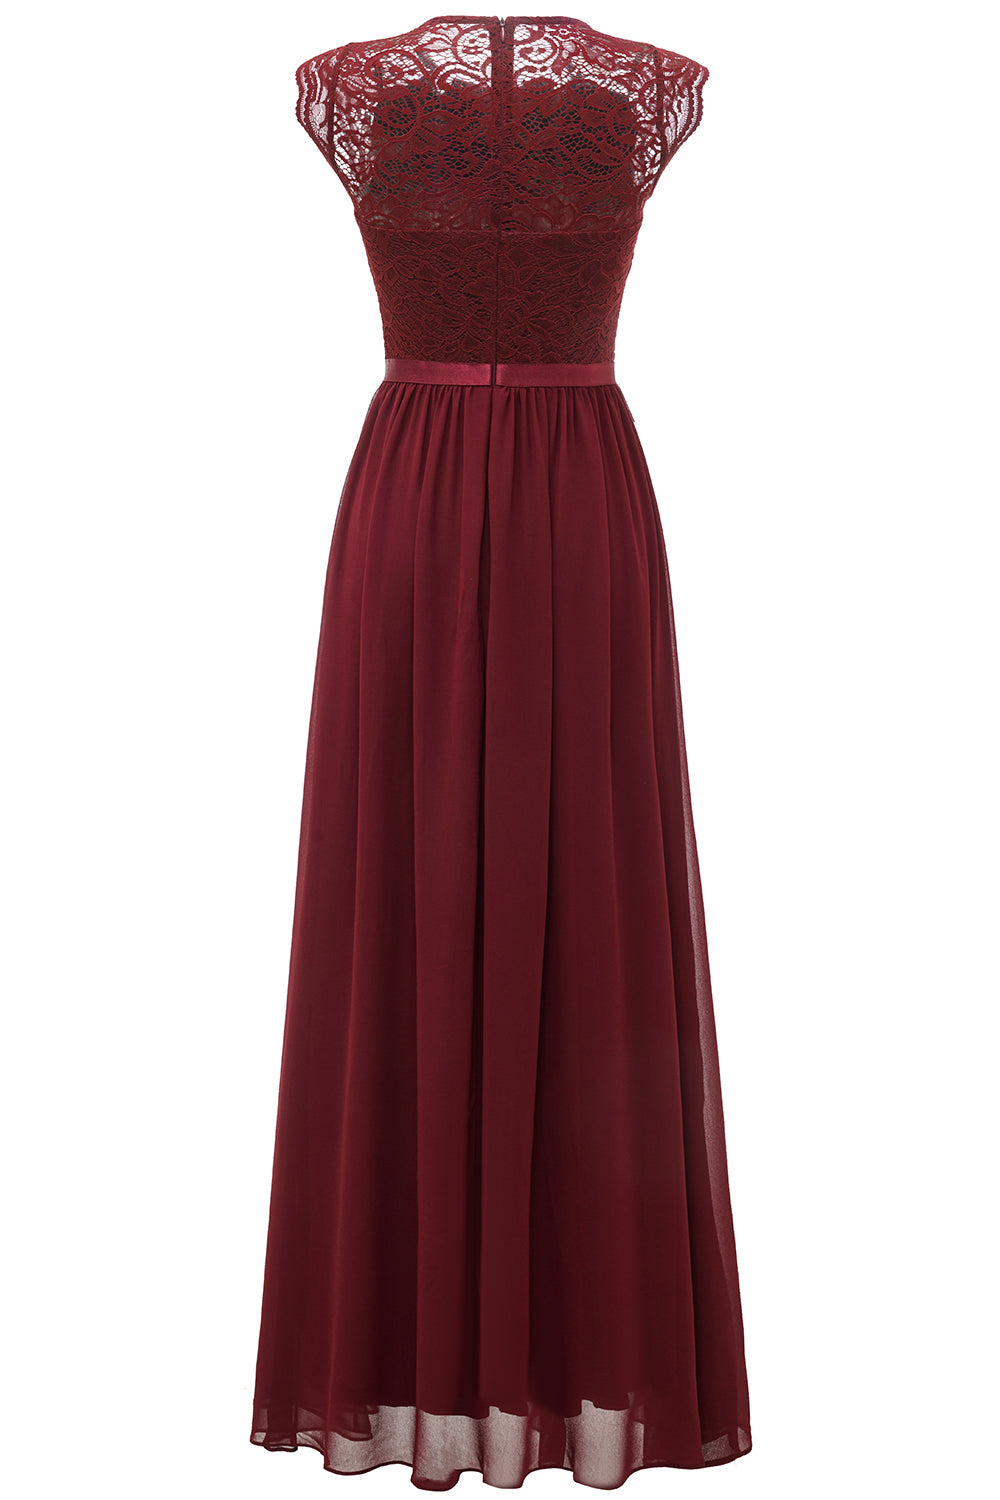 Burgundy Lace Formal Party Dress